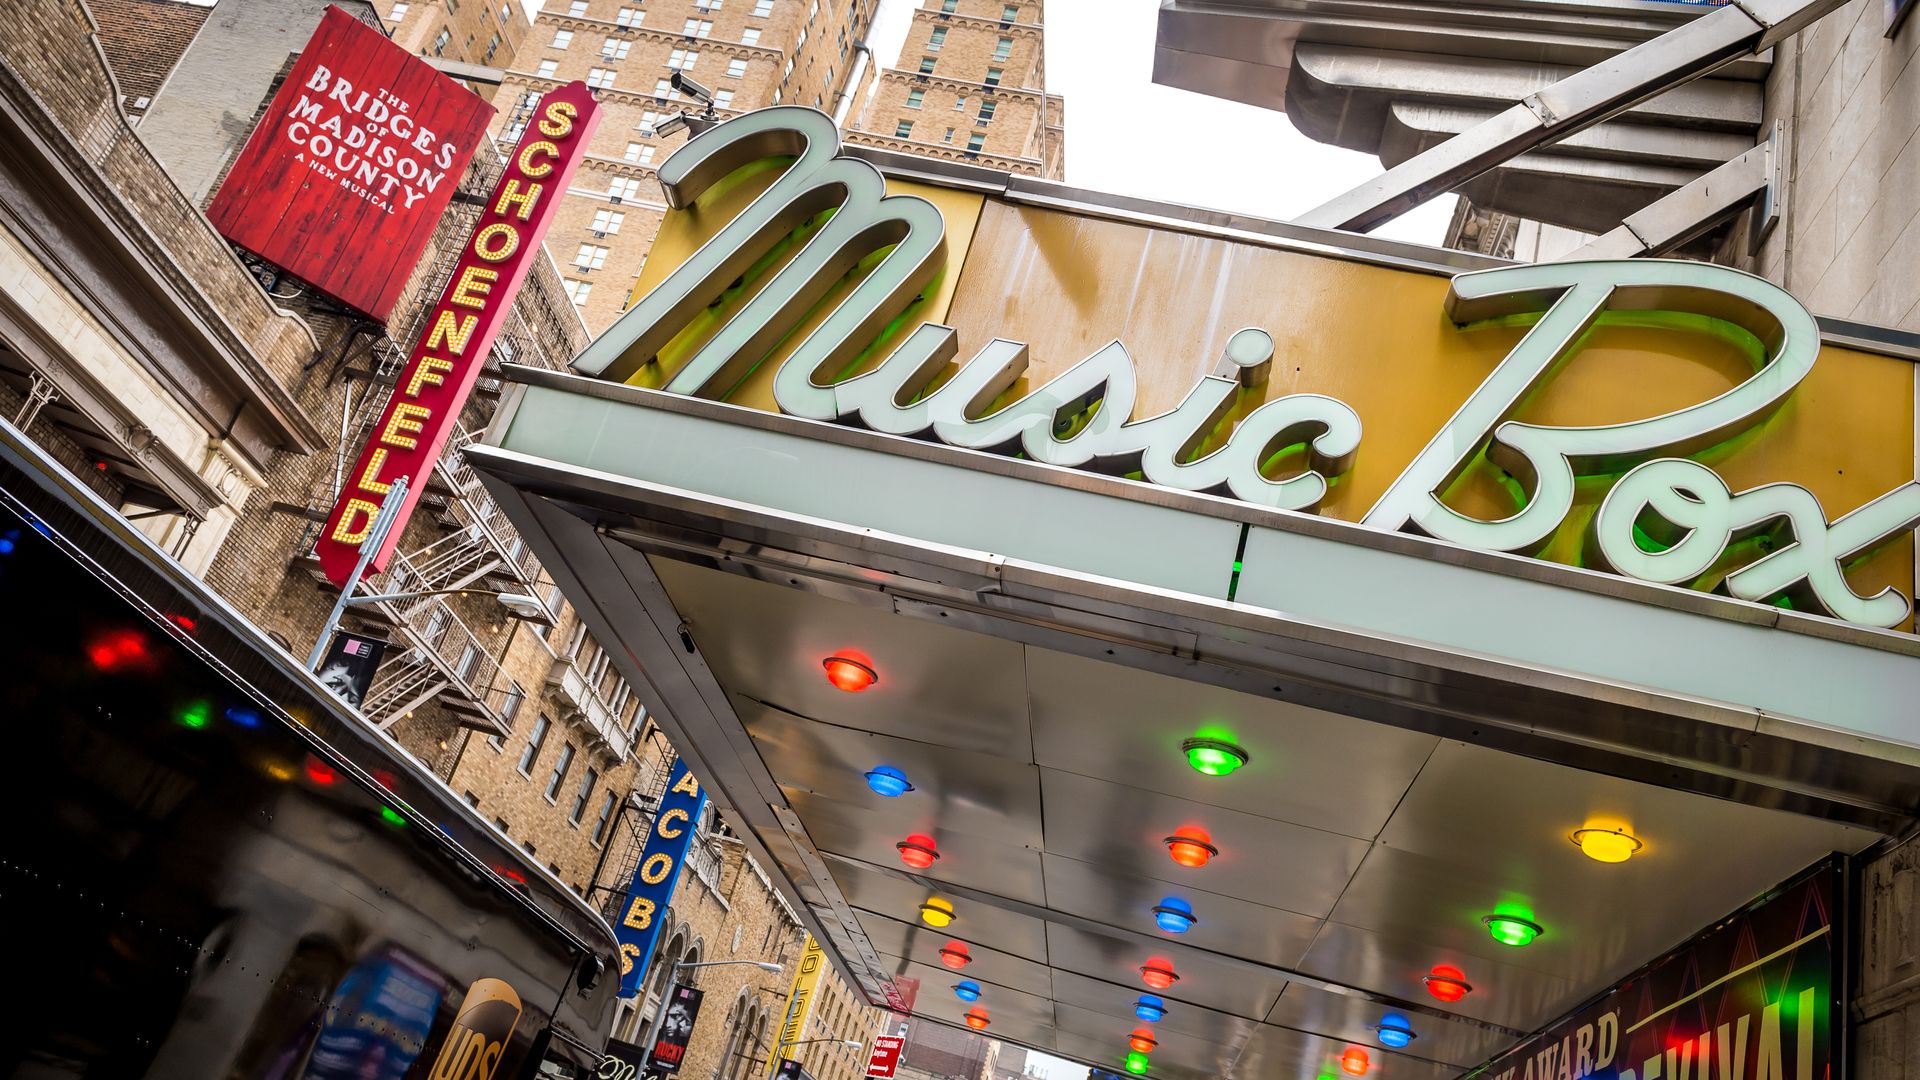 Several Broadway theaters owned by The Shubert Organization